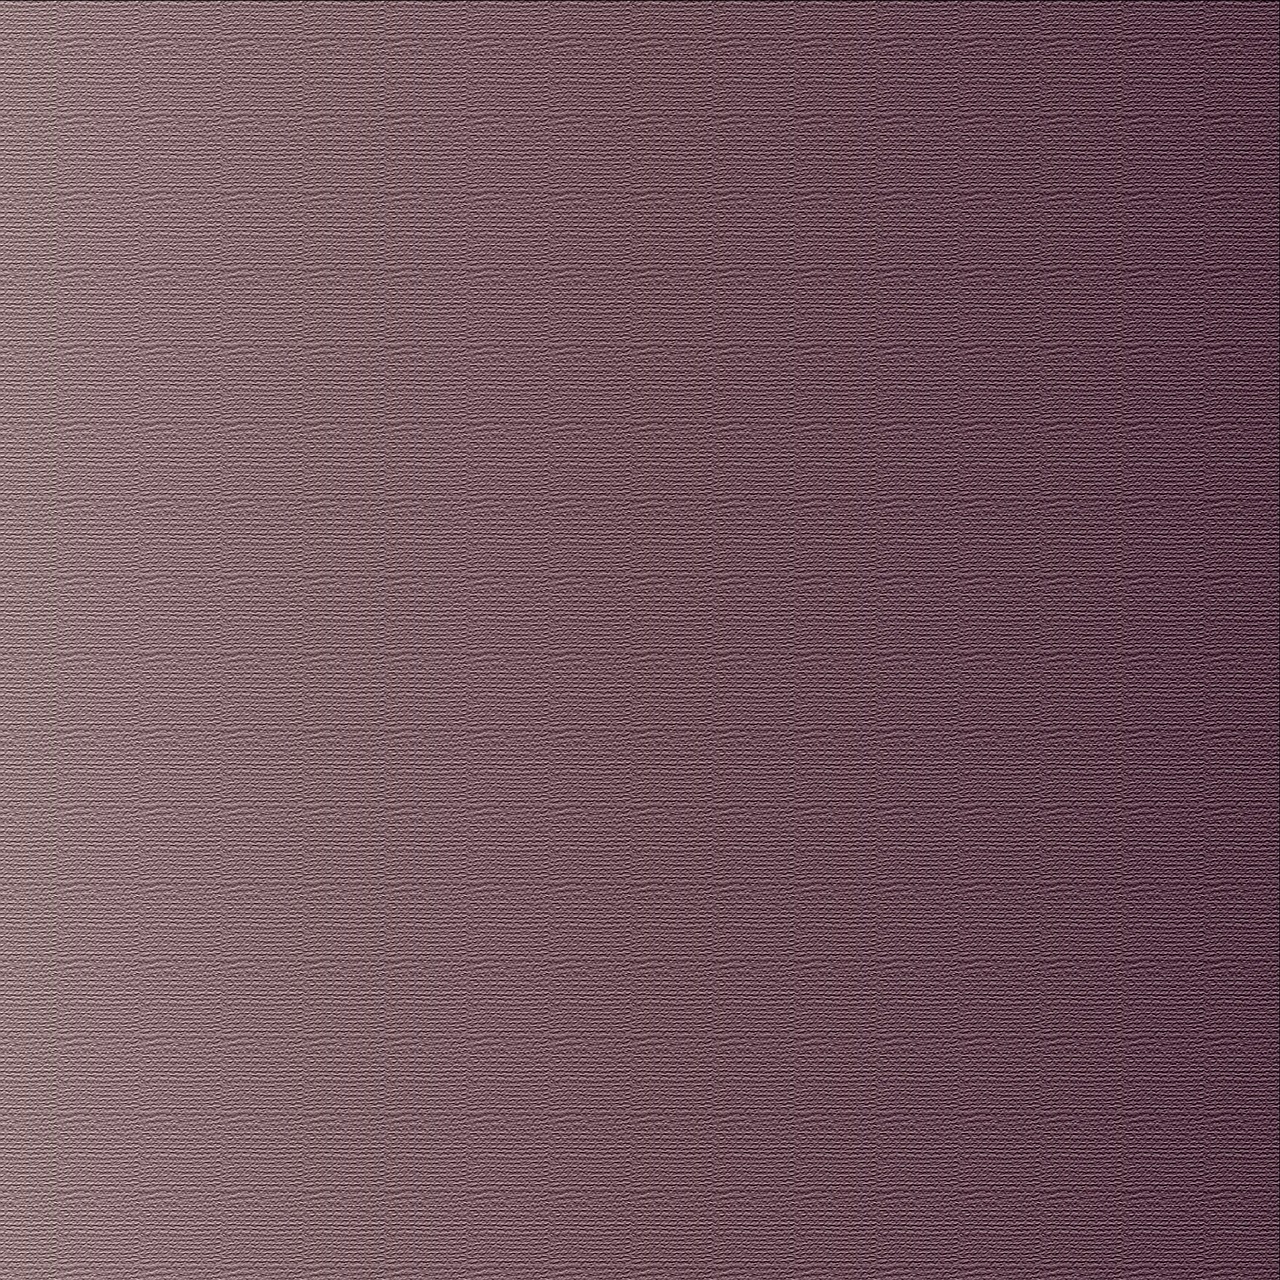 texture lilac background free photo